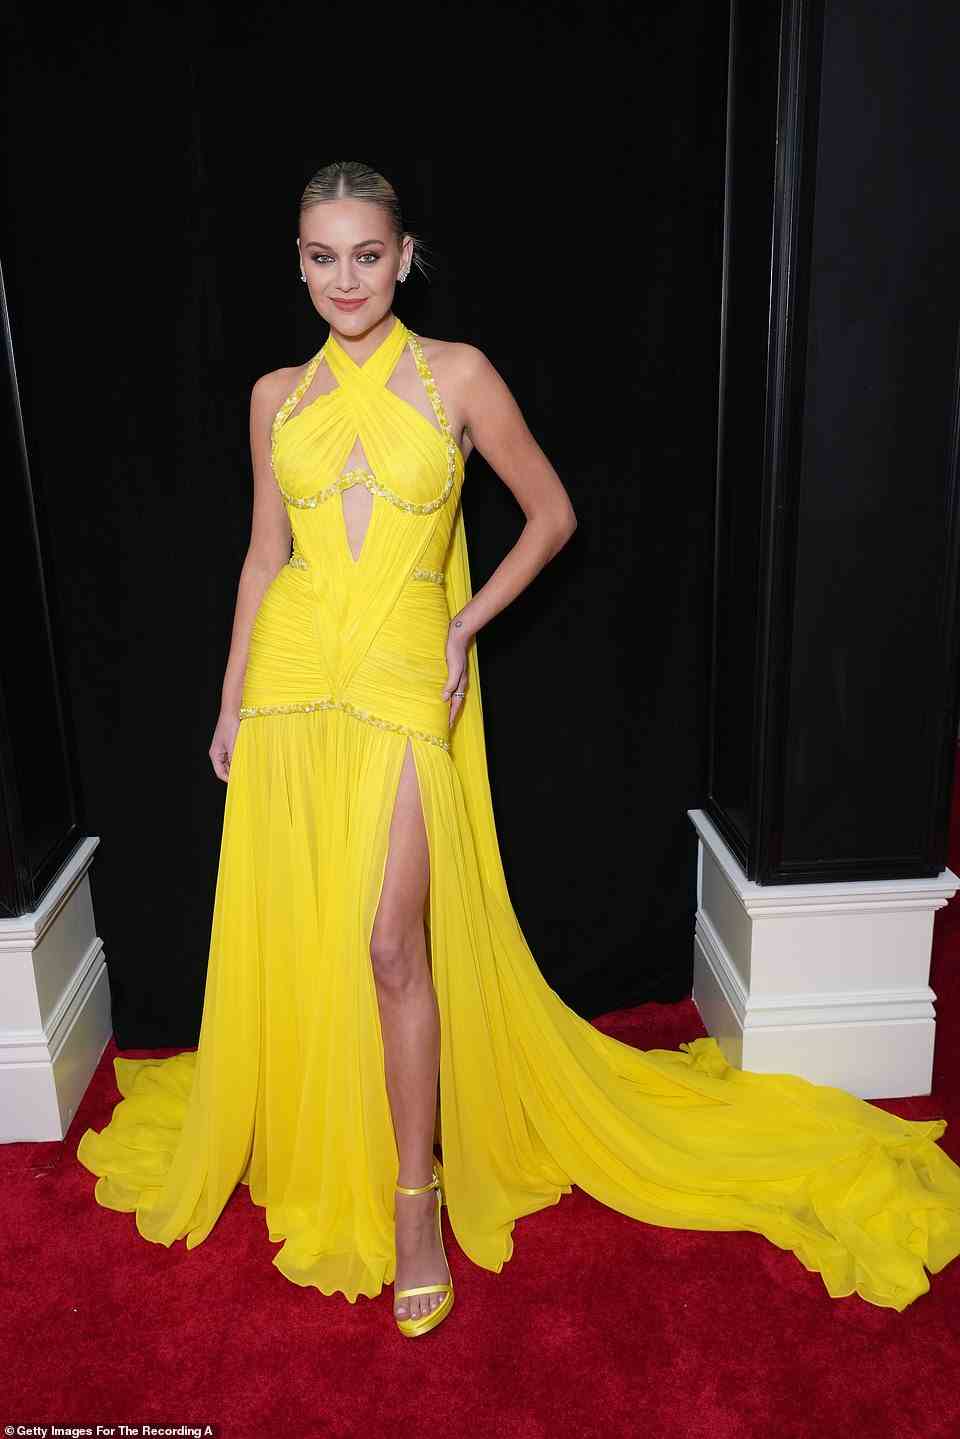 Spring vibes: Kelsea Ballerini rocked a cut-out yellow gown with matching heels